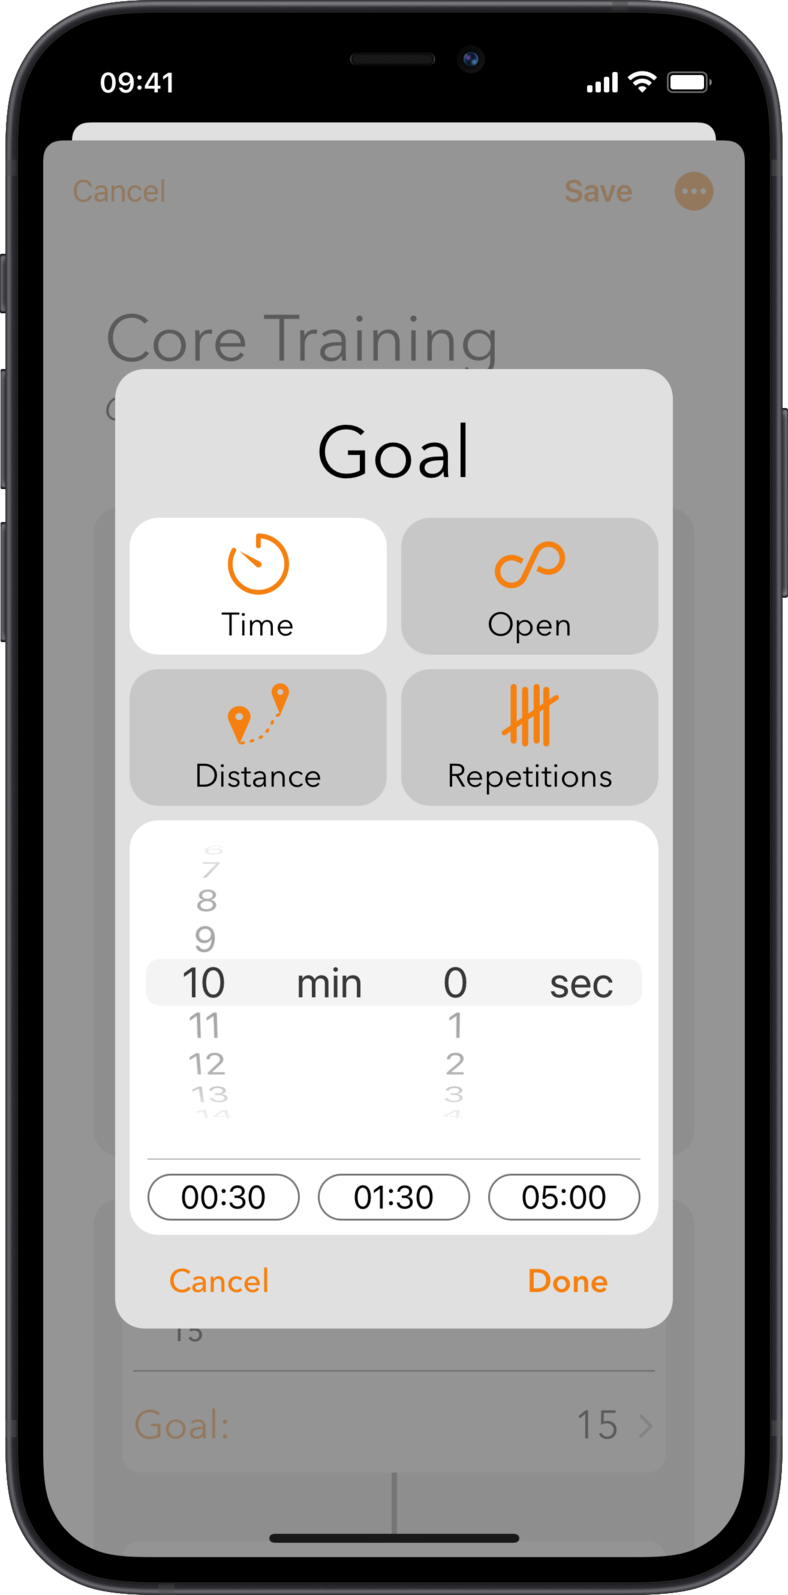 images/workout_composition/iPhone_13_Pro_workout_composition_exercise_goal_editor_framed.png Image